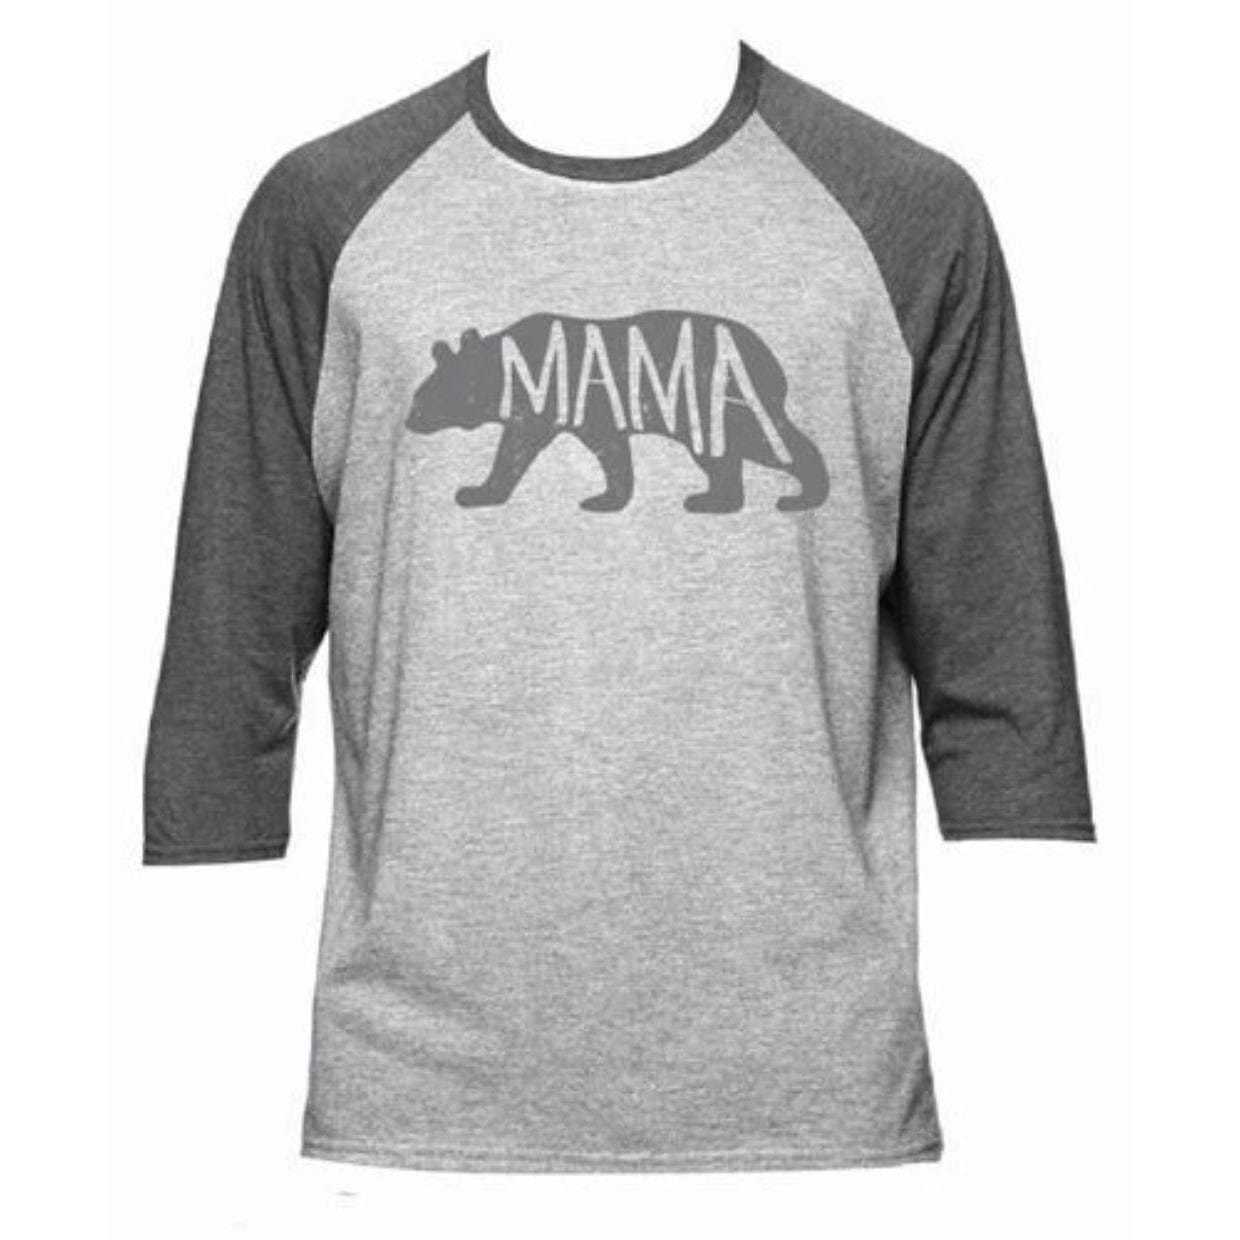 Mama Bear Baseball Style T Shirt in Heather Gray - The Pink Pigs, A Compassionate Boutique